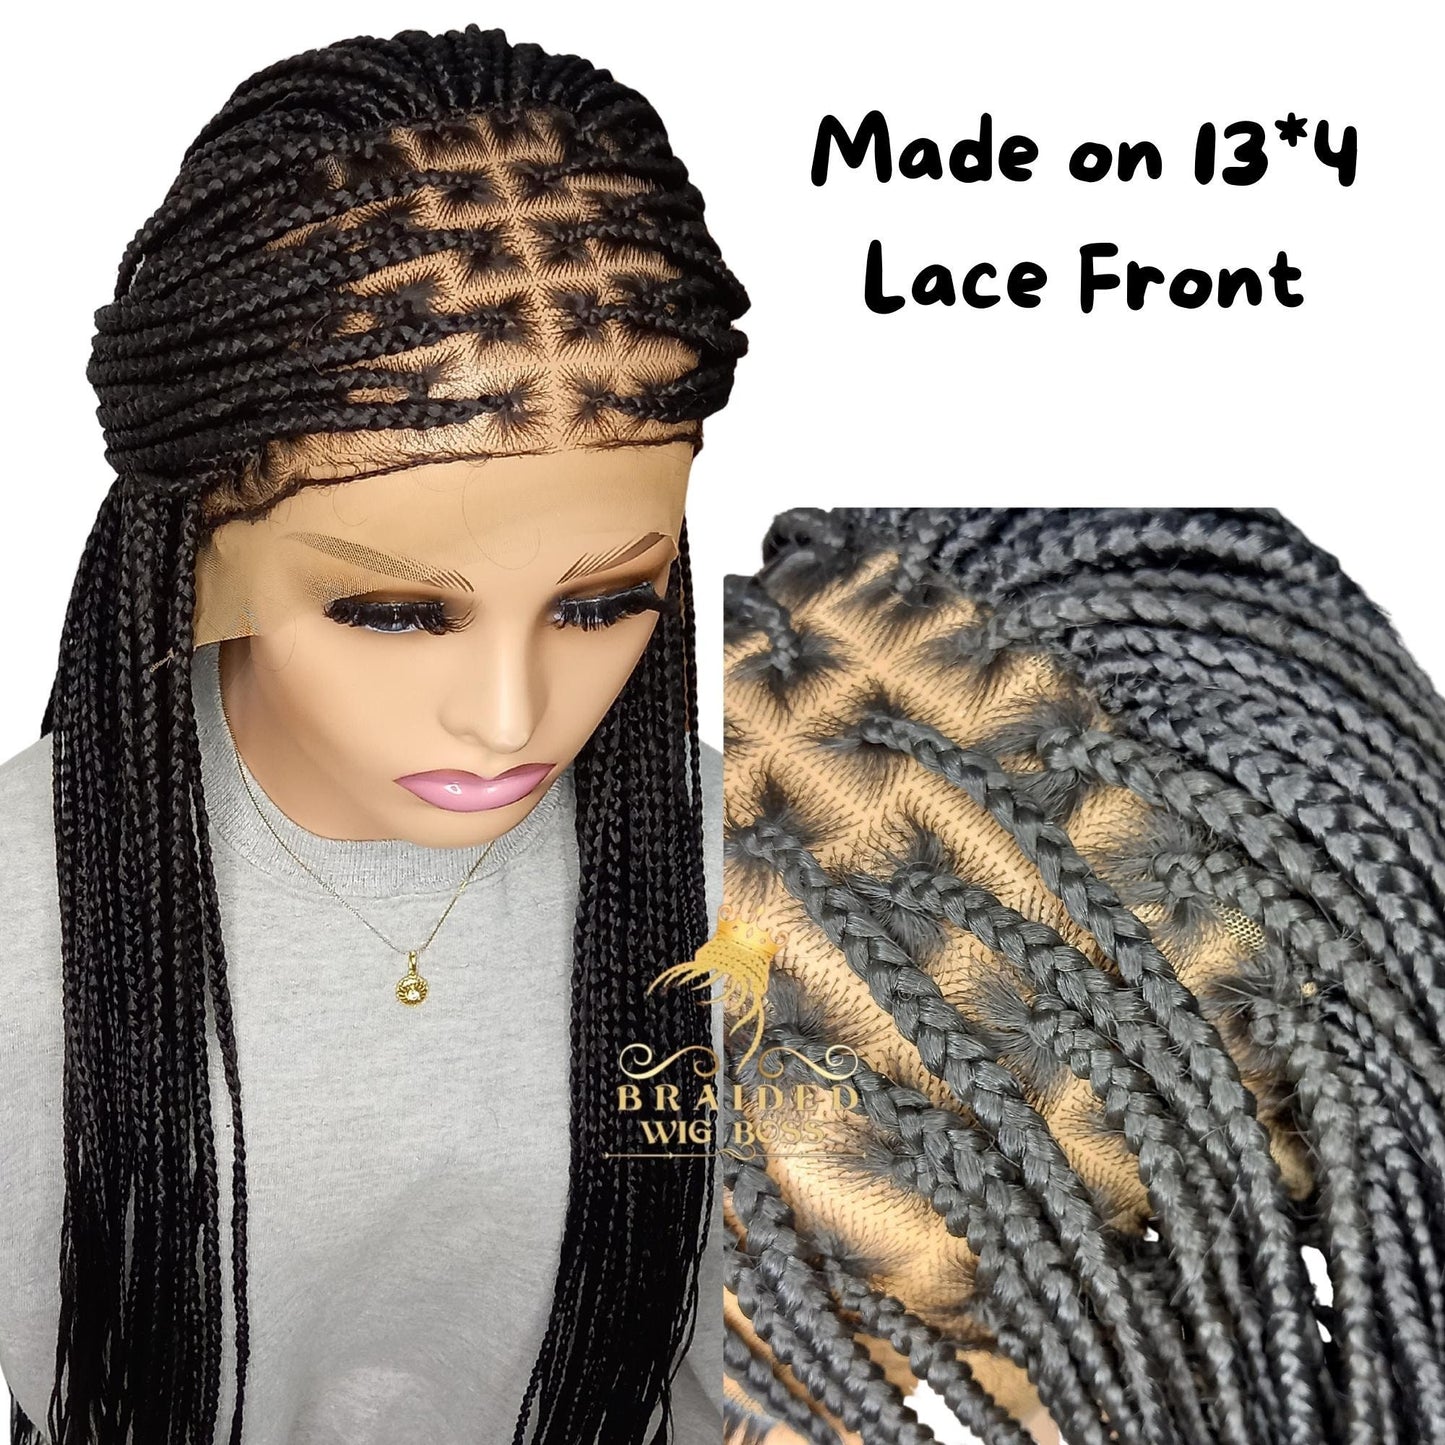 13x4 Knotless Braid Wig for Black Women - Box Braids Synthetic Braided Lace Front Wig in Color 2 Available in Multiple Lengths and Colors